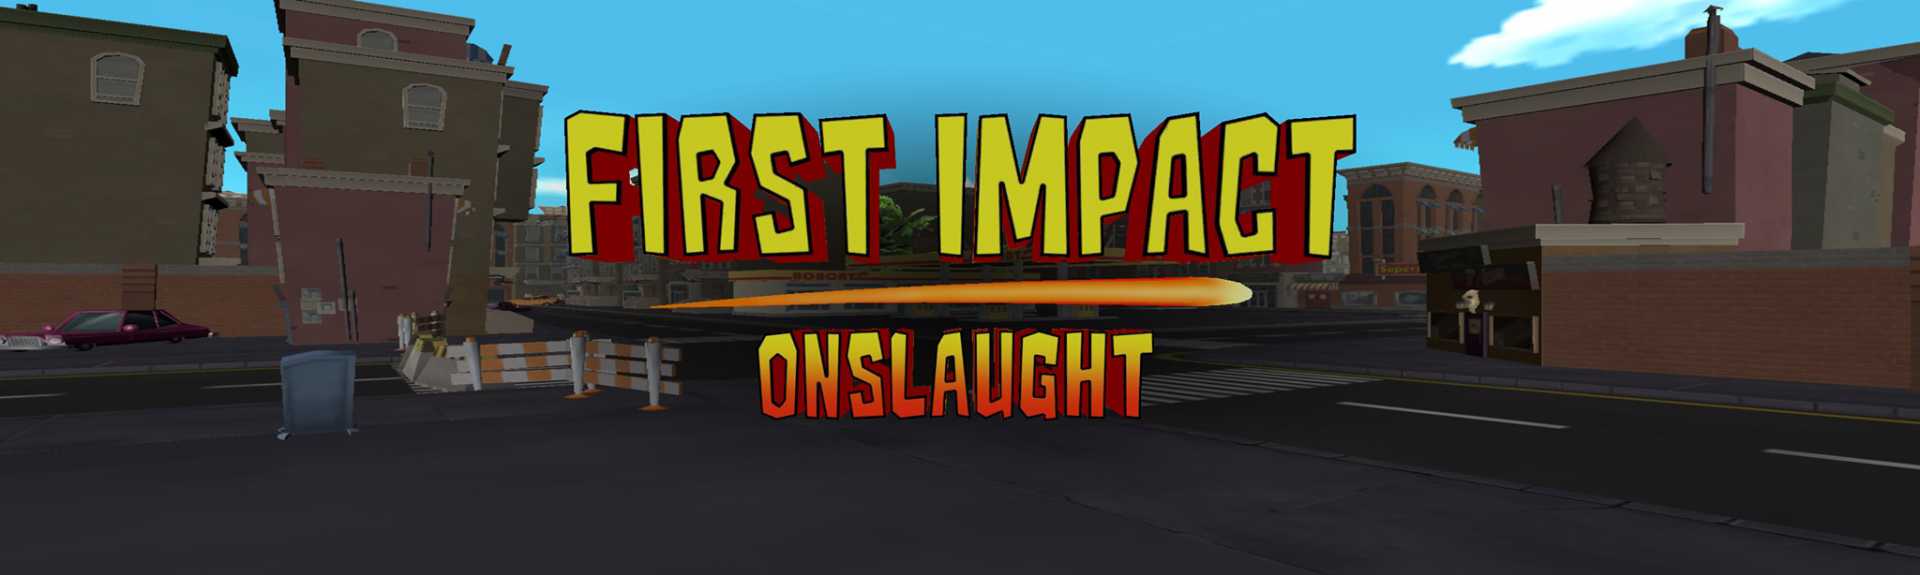 First Impact: Onslaught